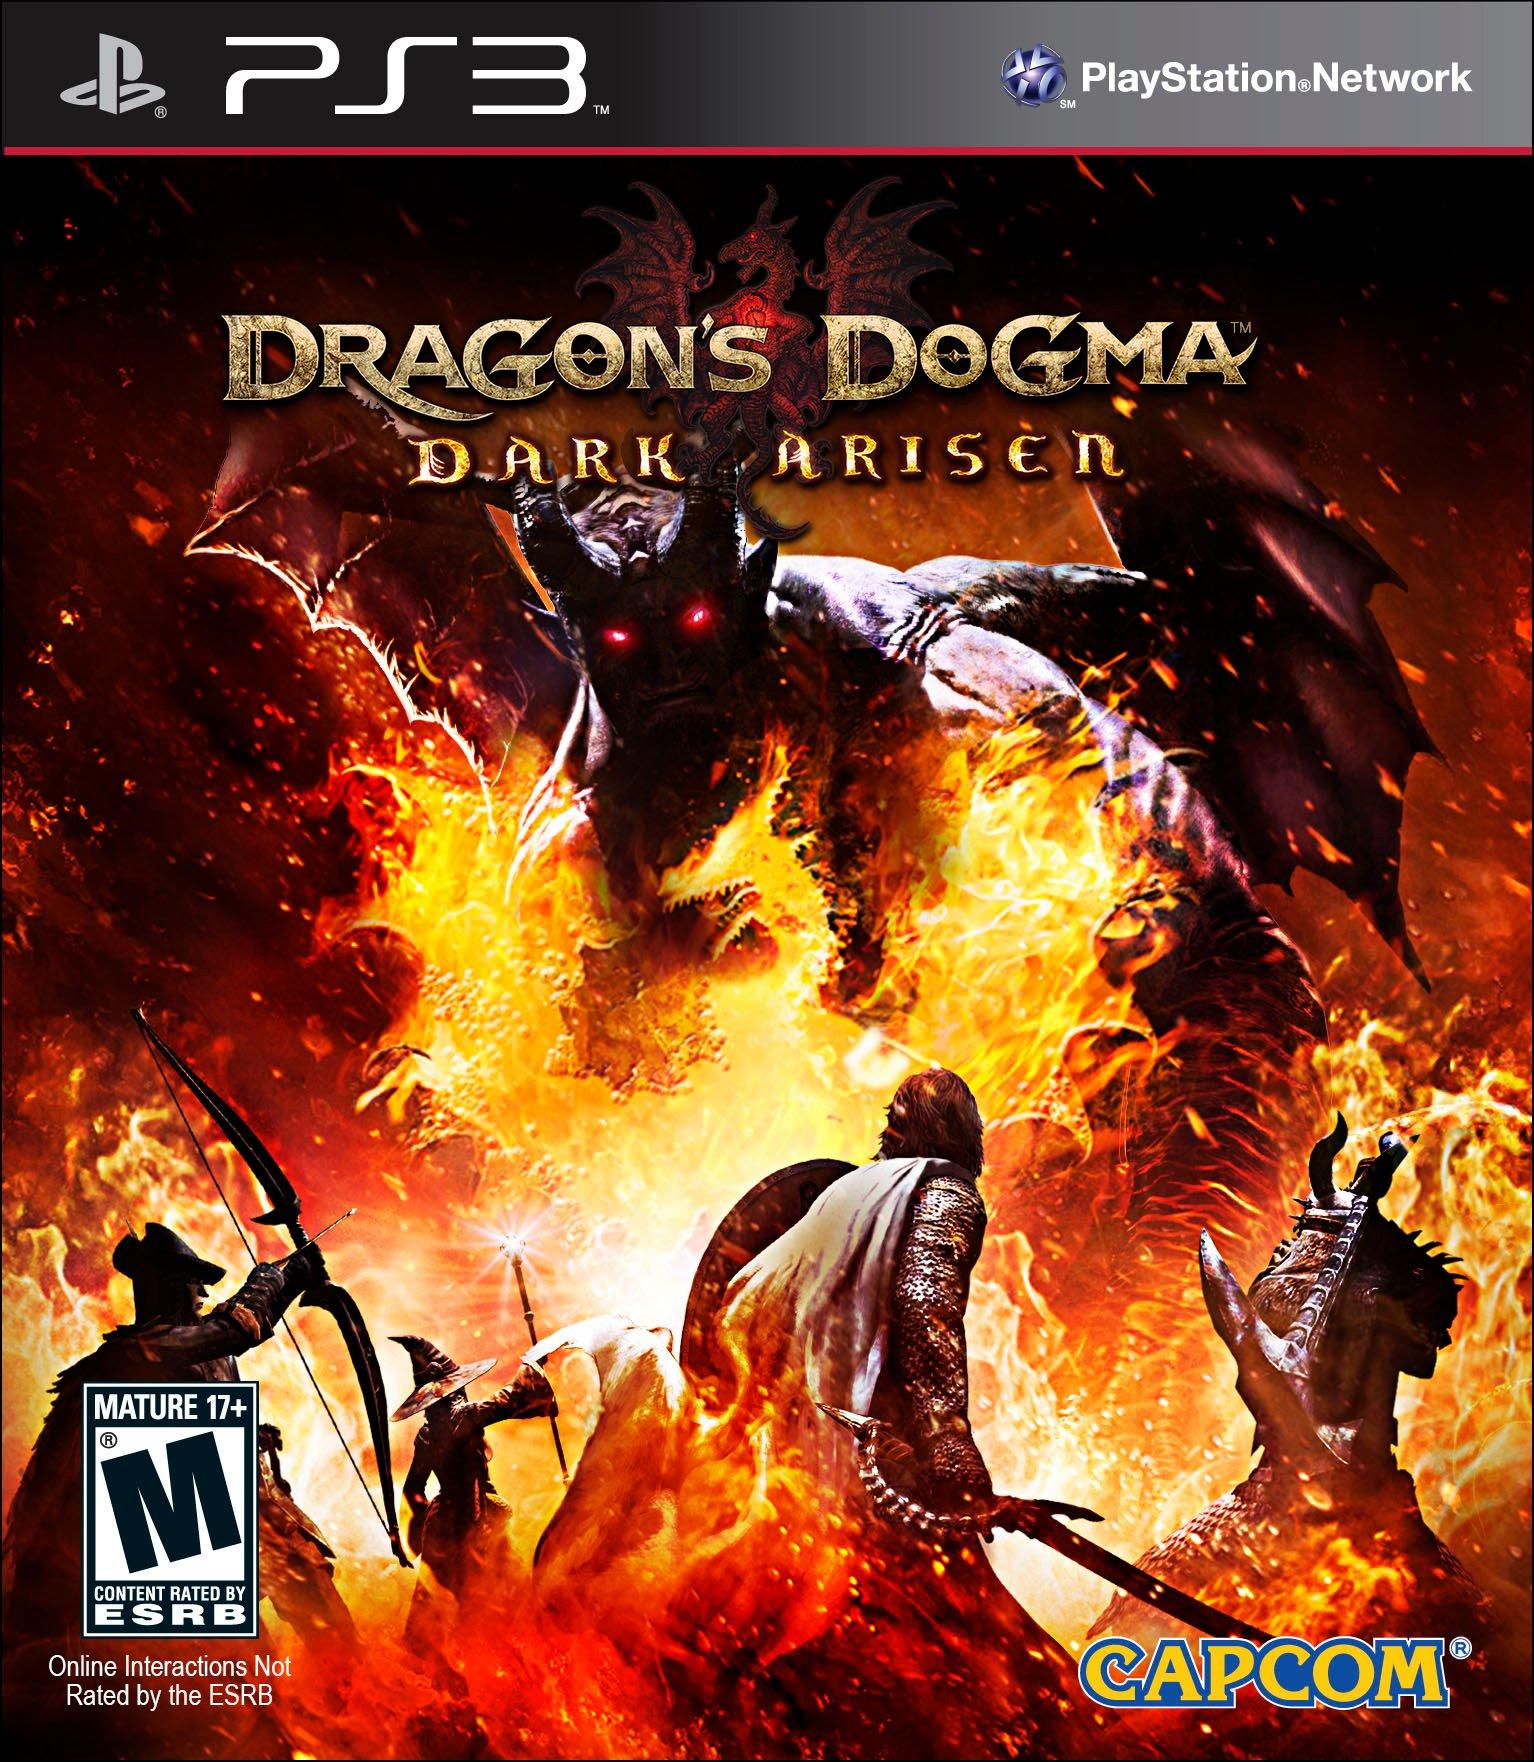 Dragons Dogma Online Season 3 Limited Edition-PS4